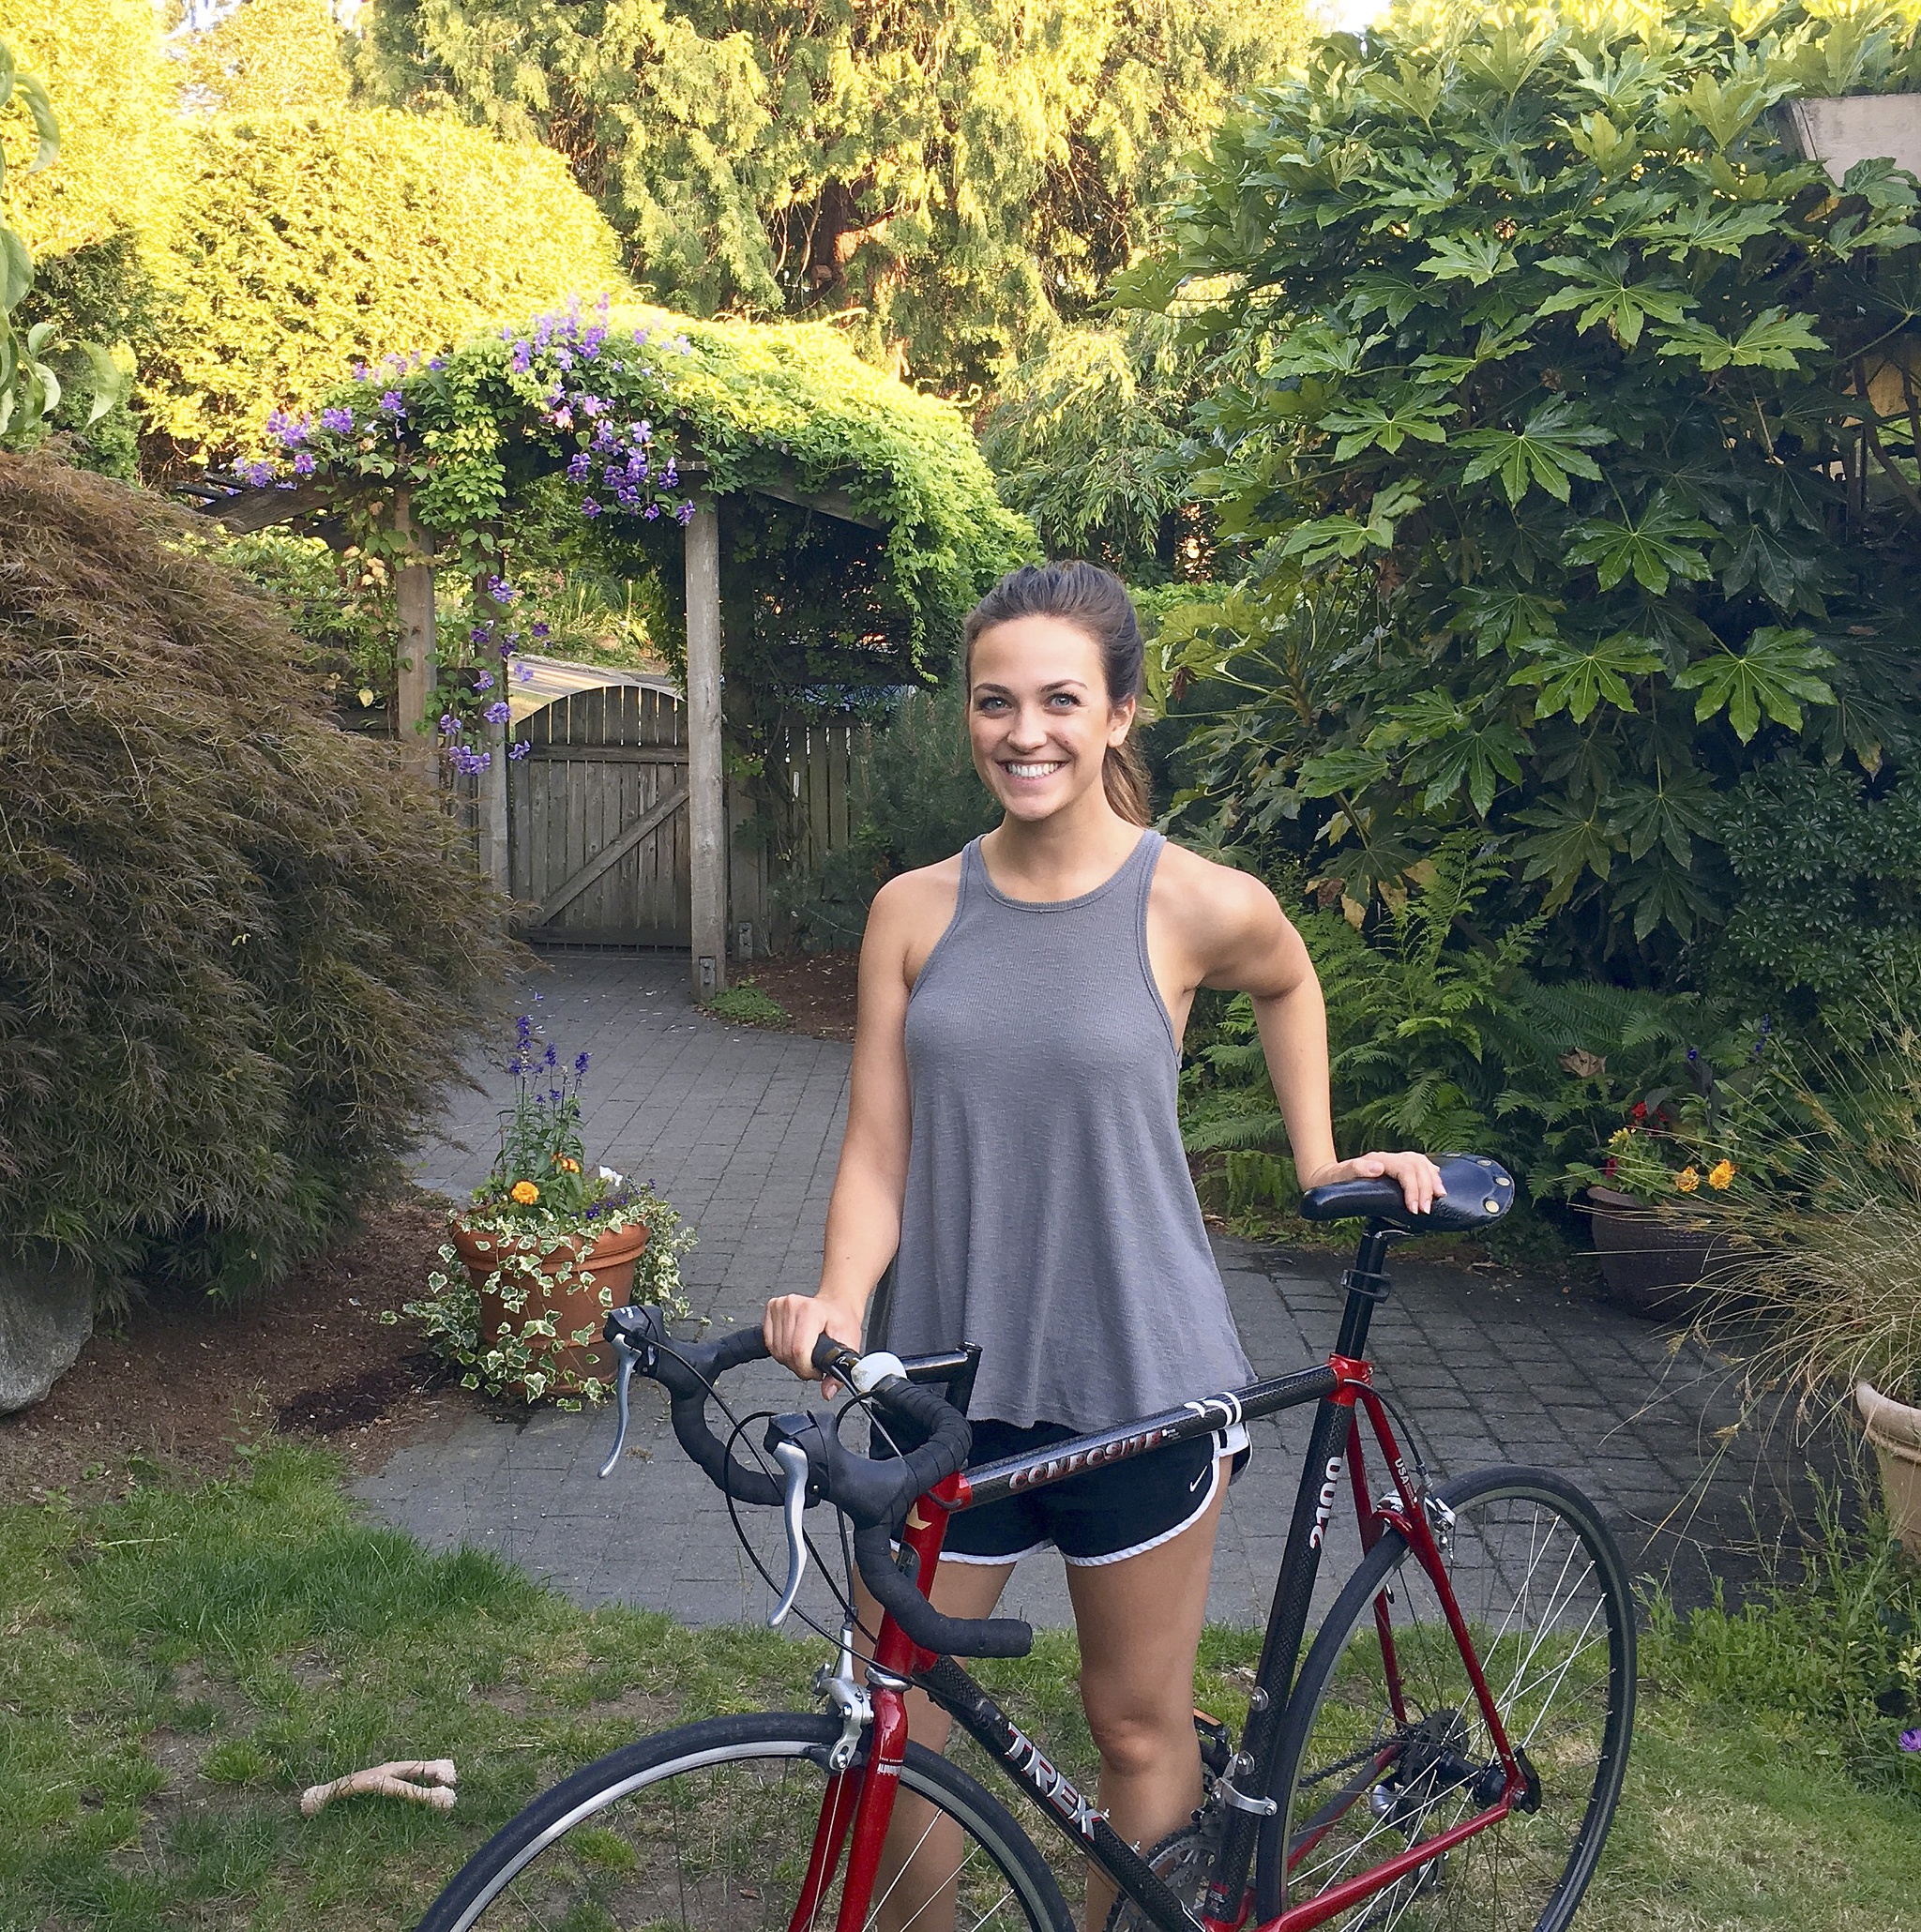 Katie Bunker, originally from Duvall, prepares for her 50 mile bike ride in August to raise money for cancer research.                                Courtesy Photo